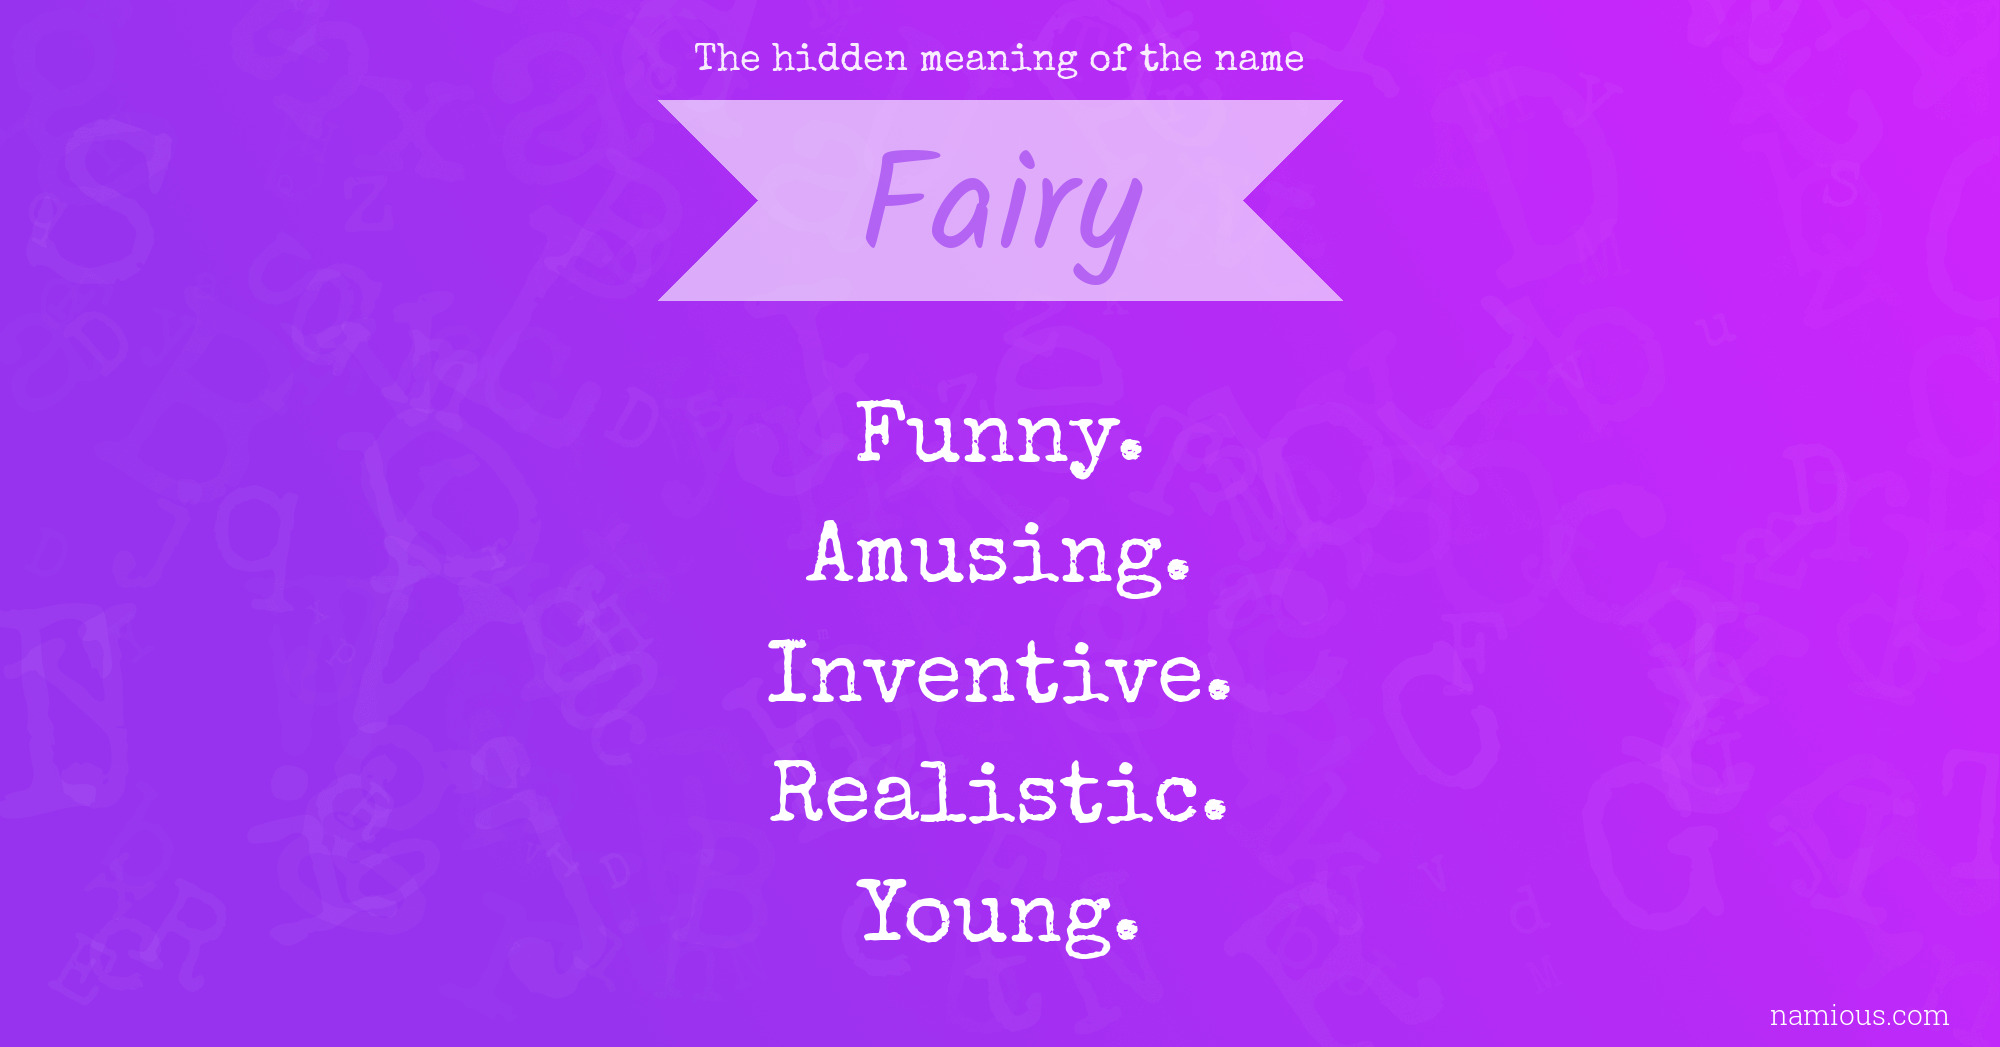 The hidden meaning of the name Fairy